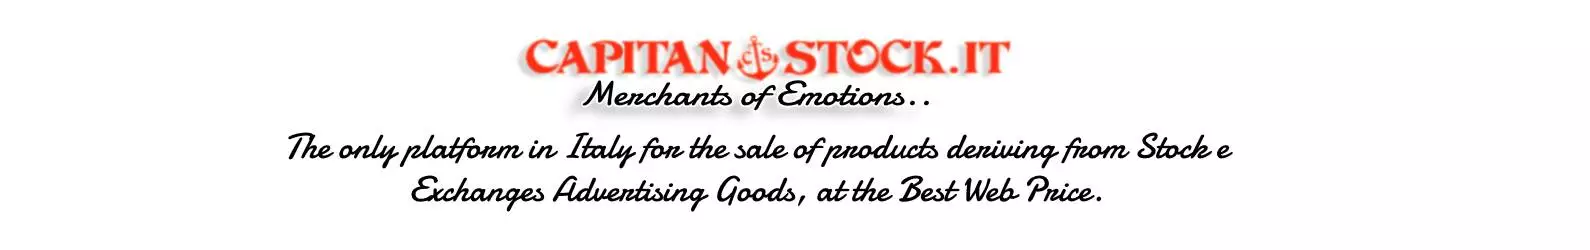 Capitanstock.it® | Mercanti di Emozioni - The only platform in Italy for the sale of products deriving from Stock and Exchange of Advertising Goods at the Best Web Price!